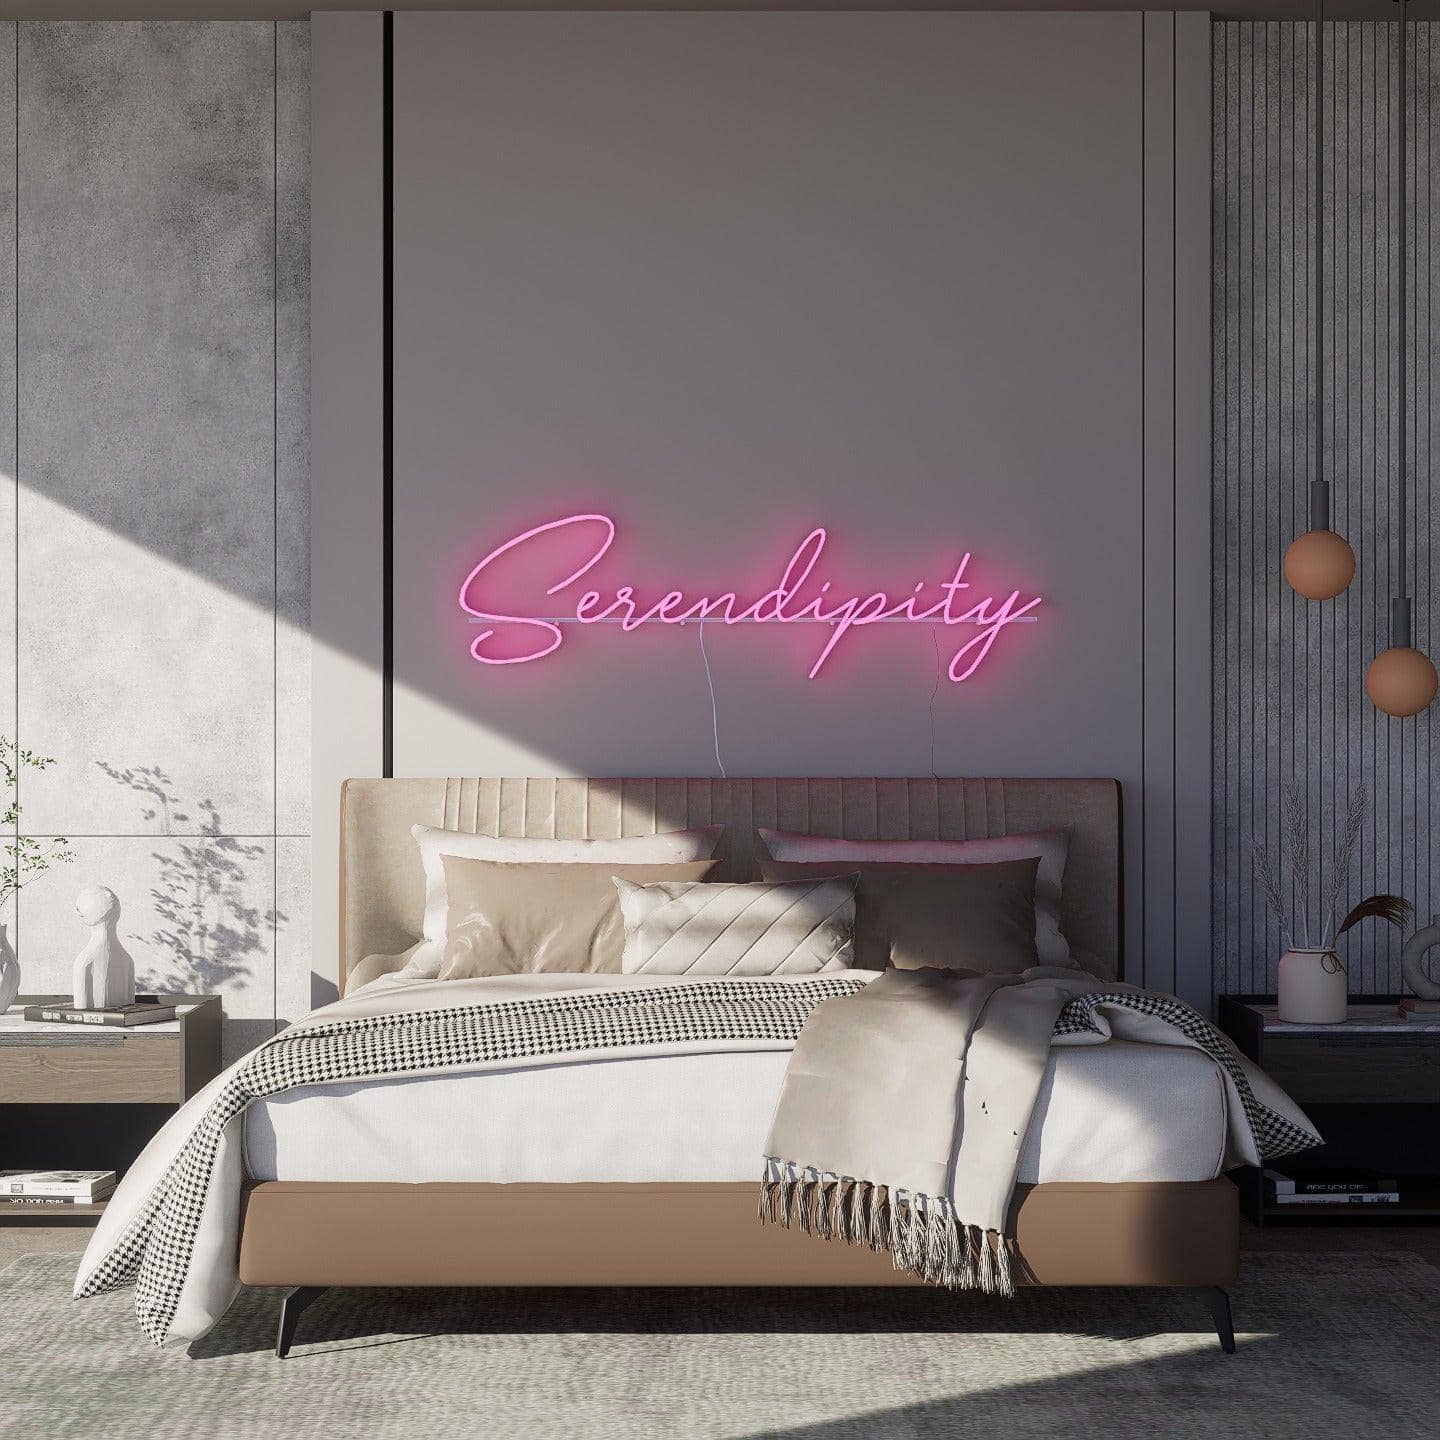 light-up-pink-neon-lights-during-the-day-and-hang-on-the-wall-for-display-srendipity